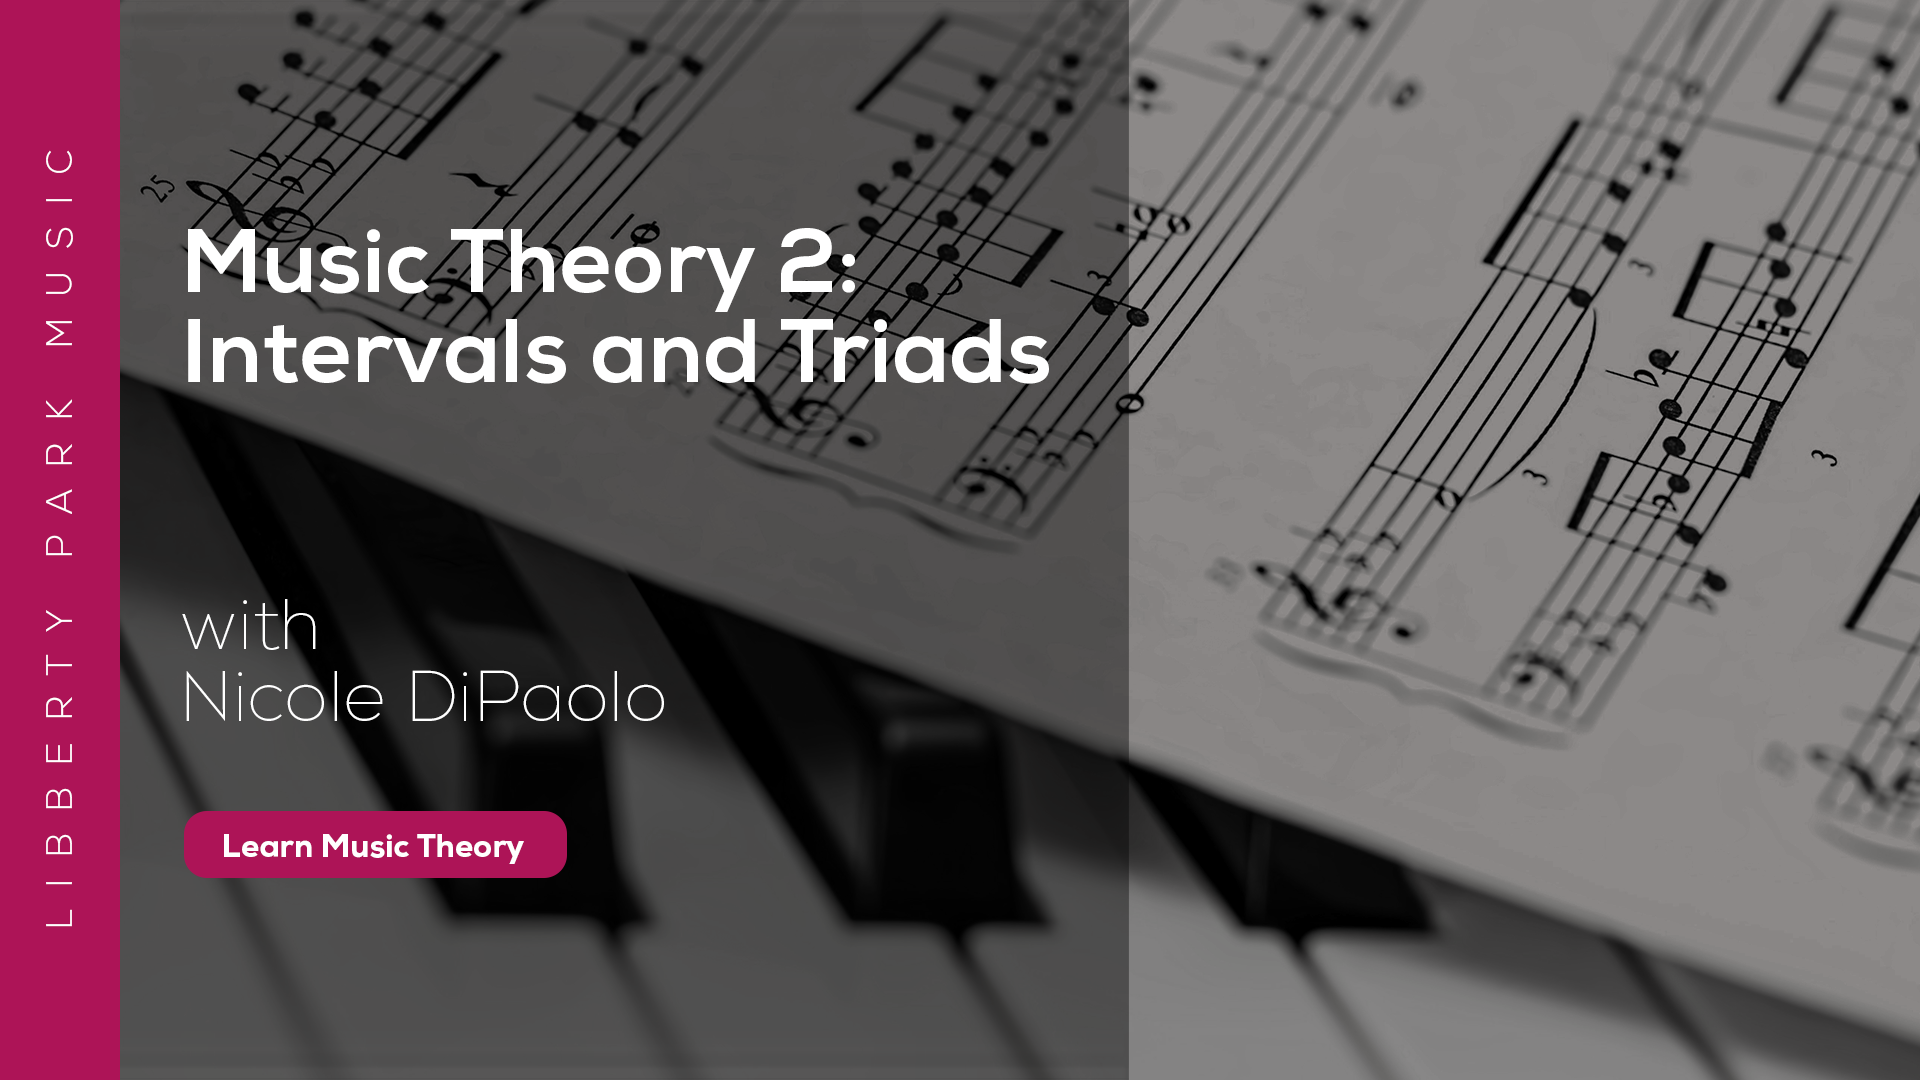 Music theory course books